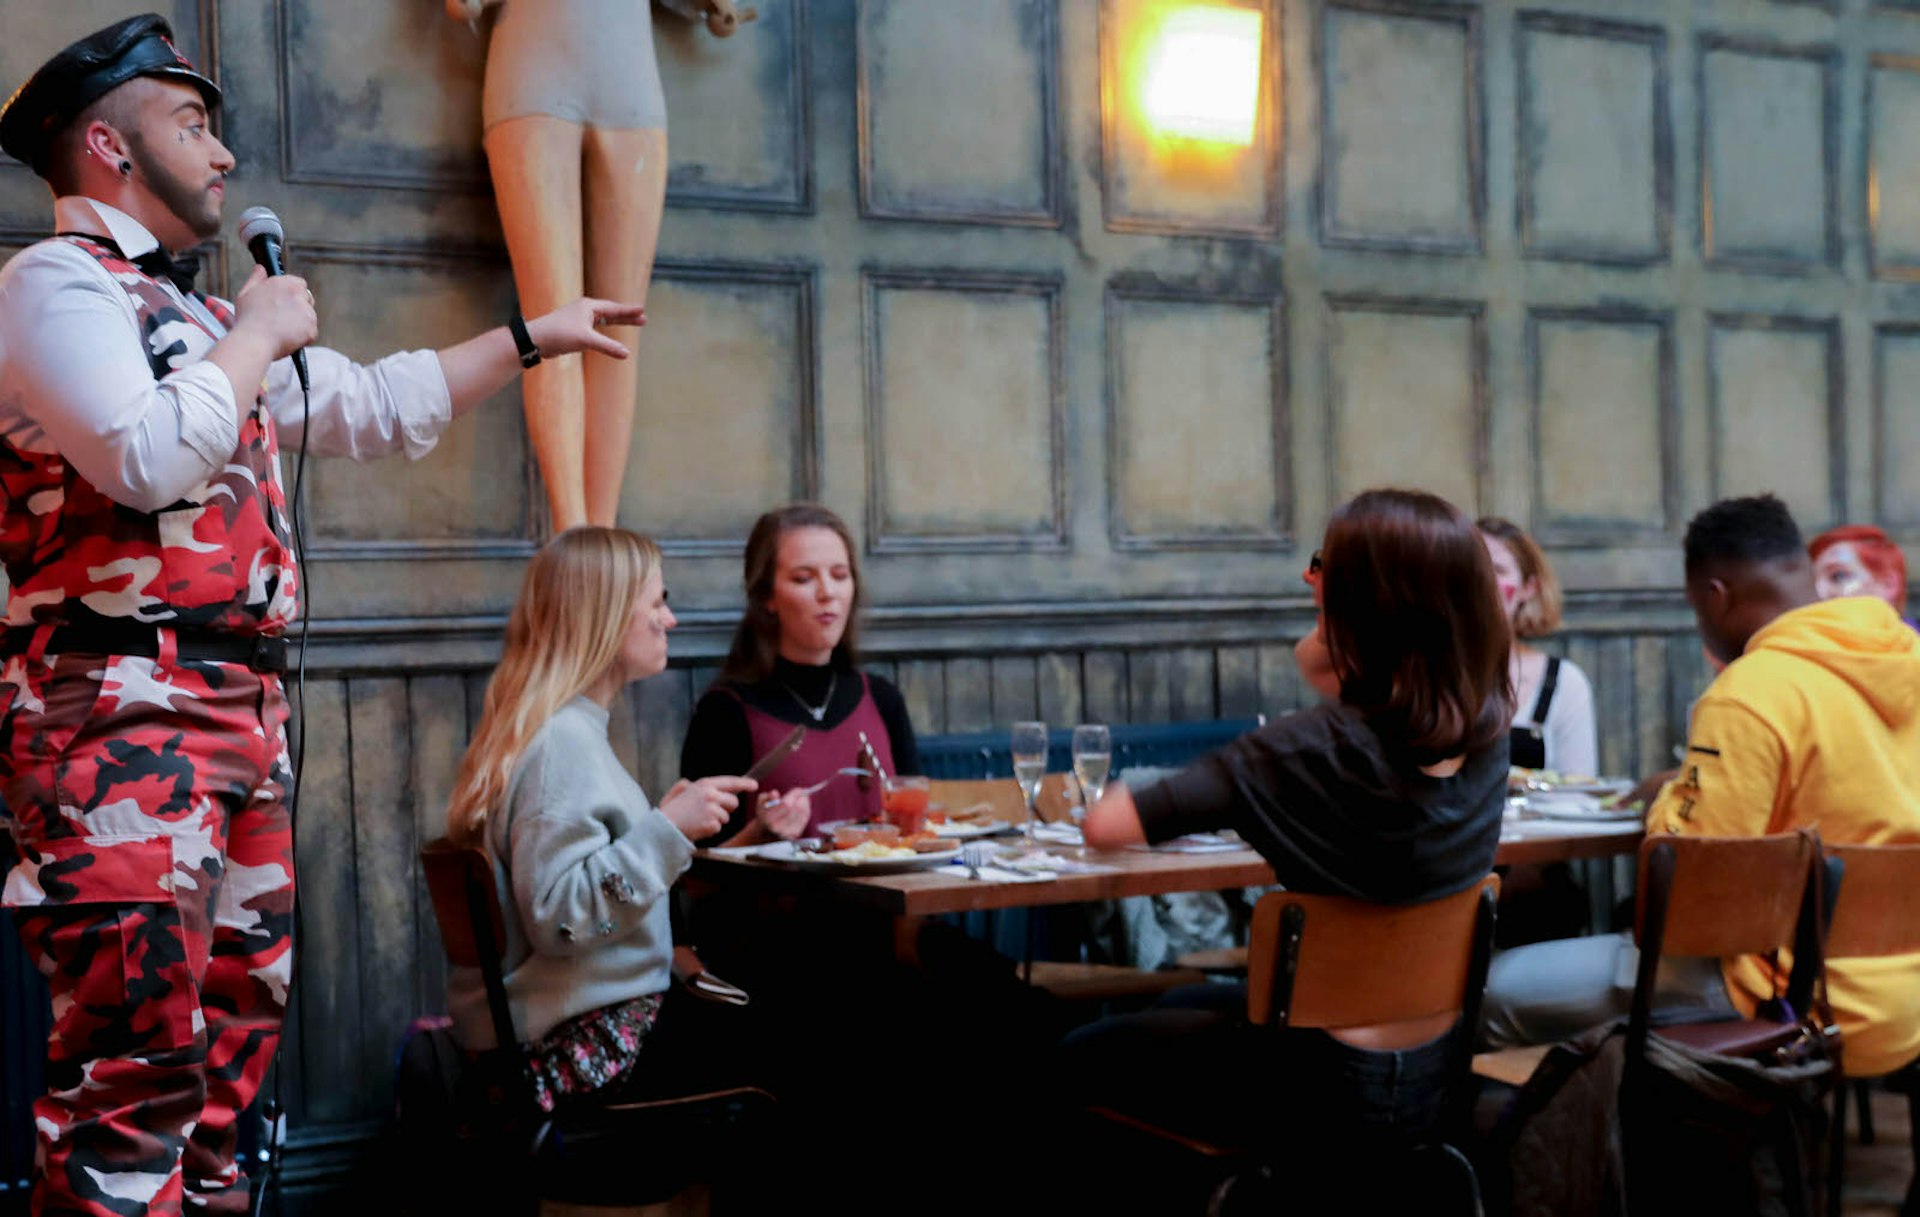 A group of people sit around a table eating brunch and laughing while a drag queen hosts the entertainment wearing pink camouflage overalls, pointing somewhere off camera. There is a blow-up doll on the wall. London drag brunches